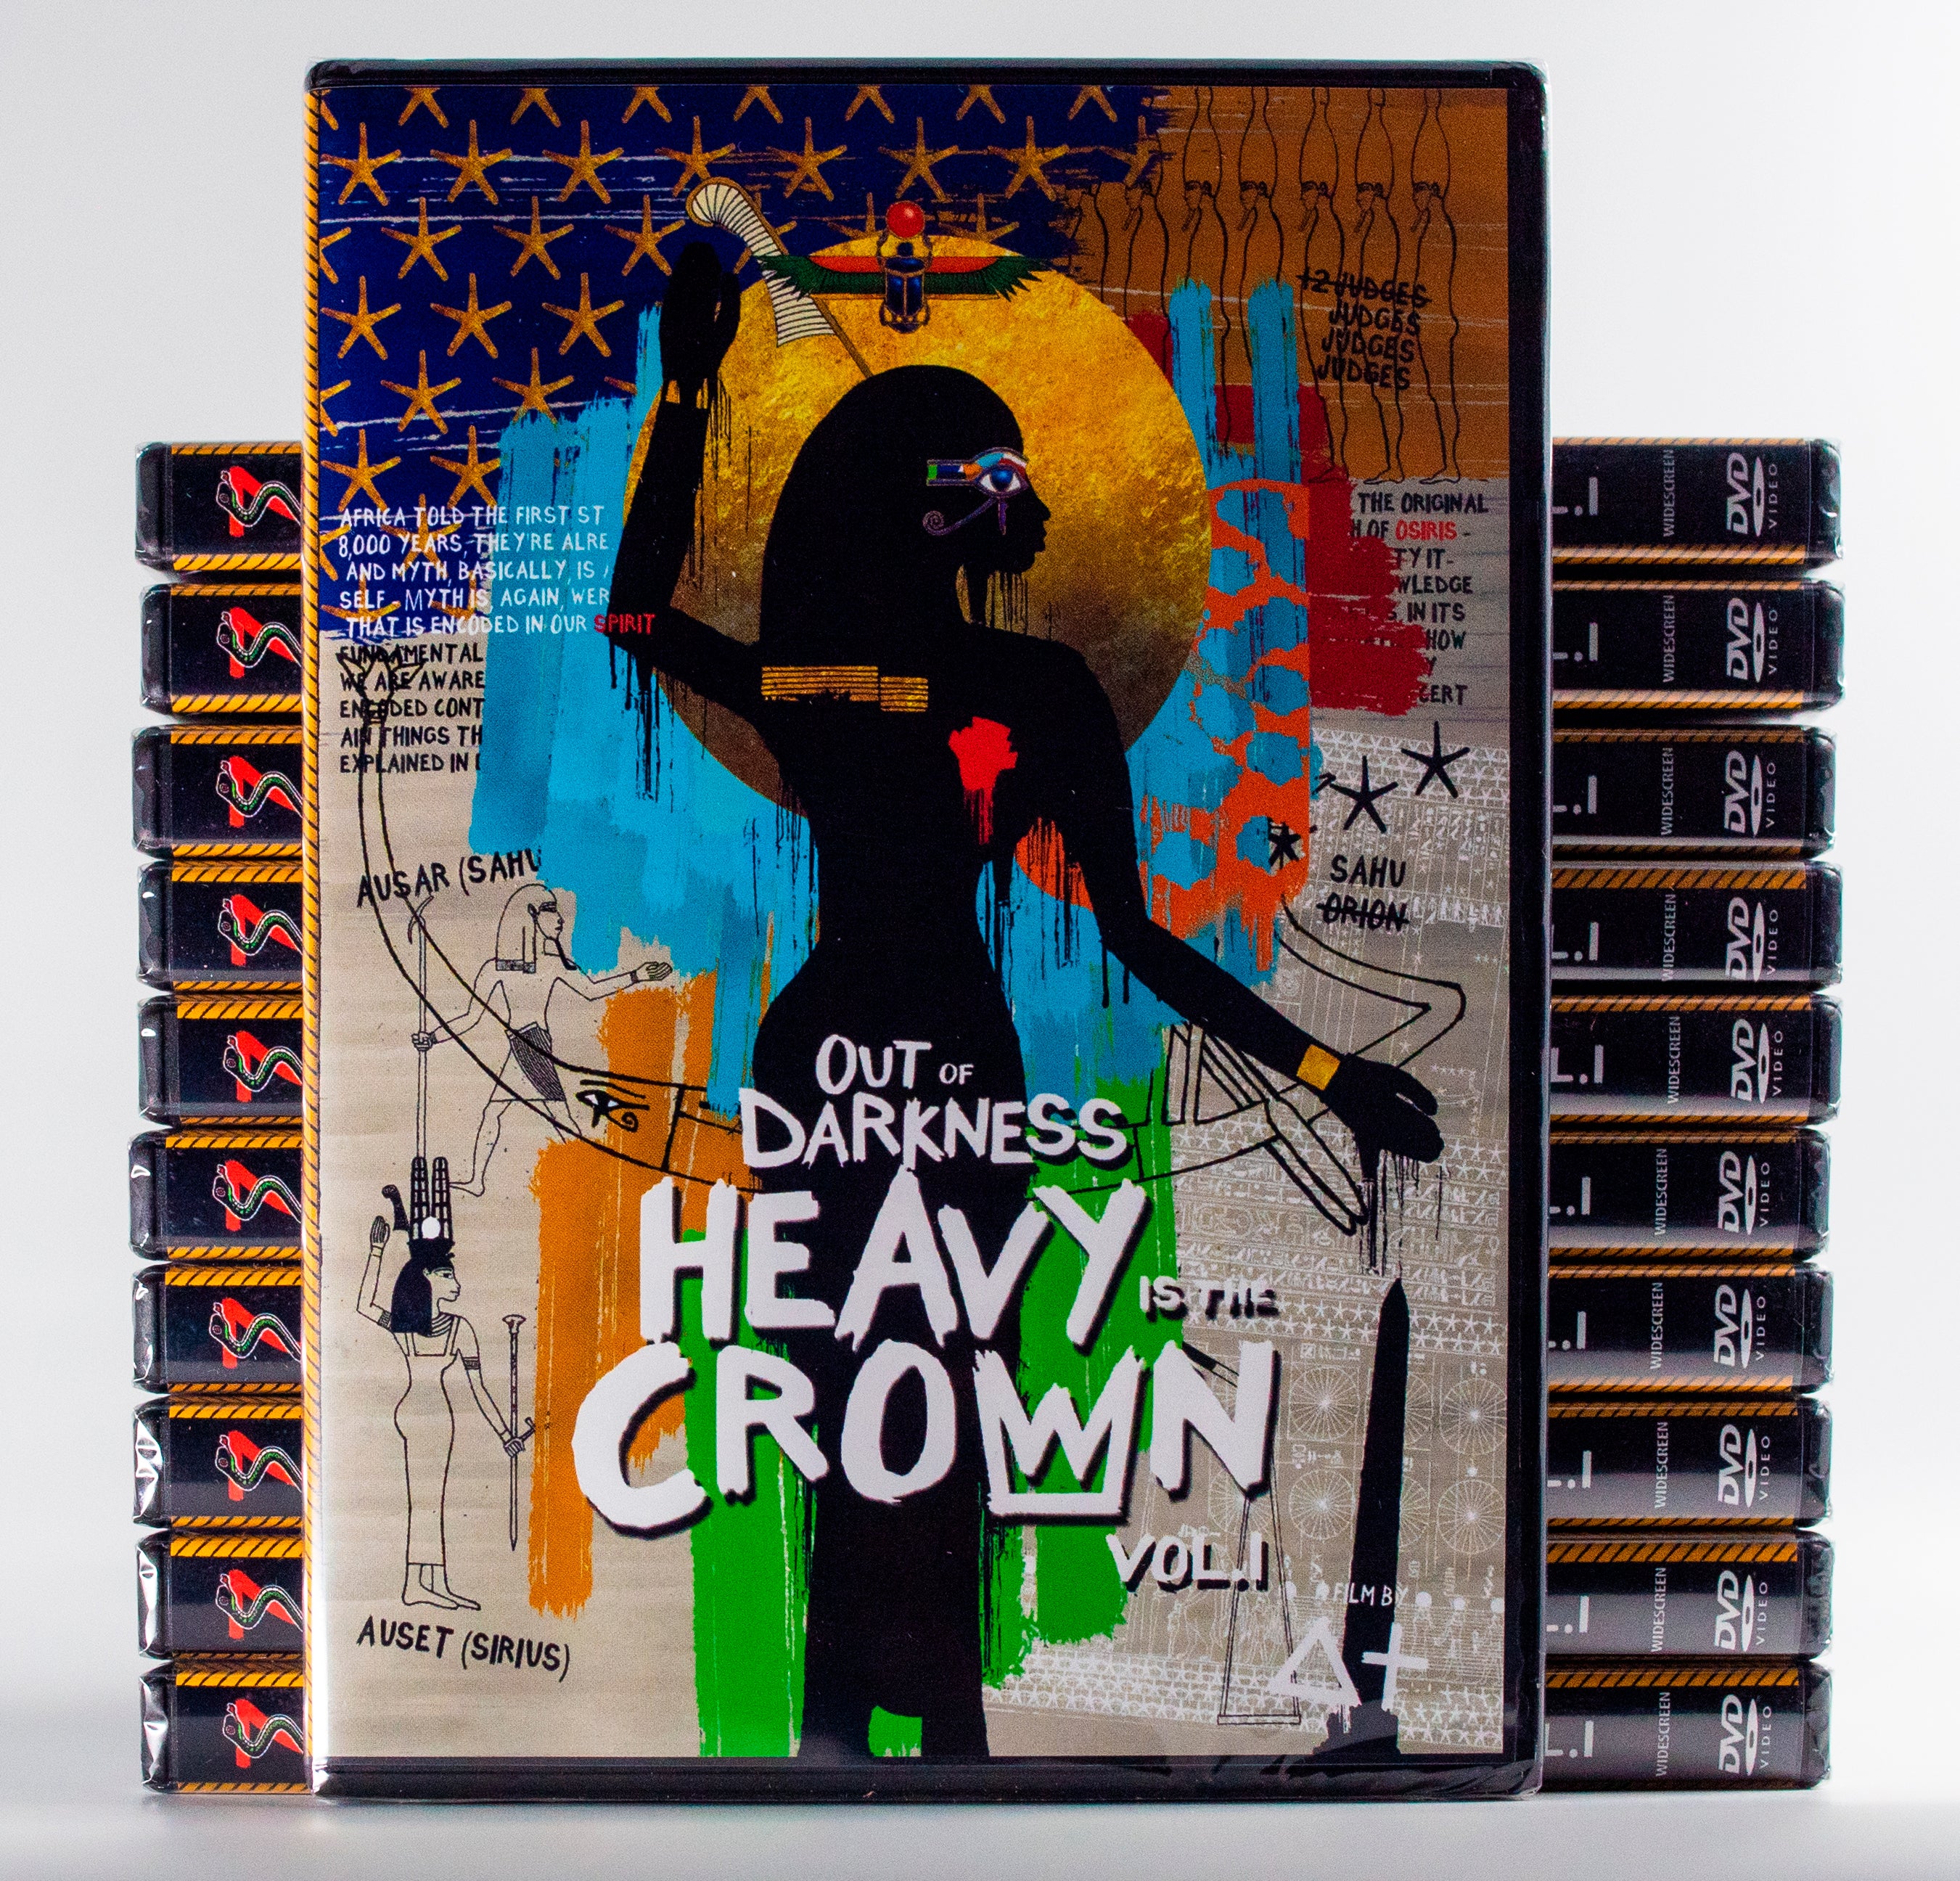 Out of Darkness: Heavy is the Crown Vol. [DVD] (Wholesale 25)